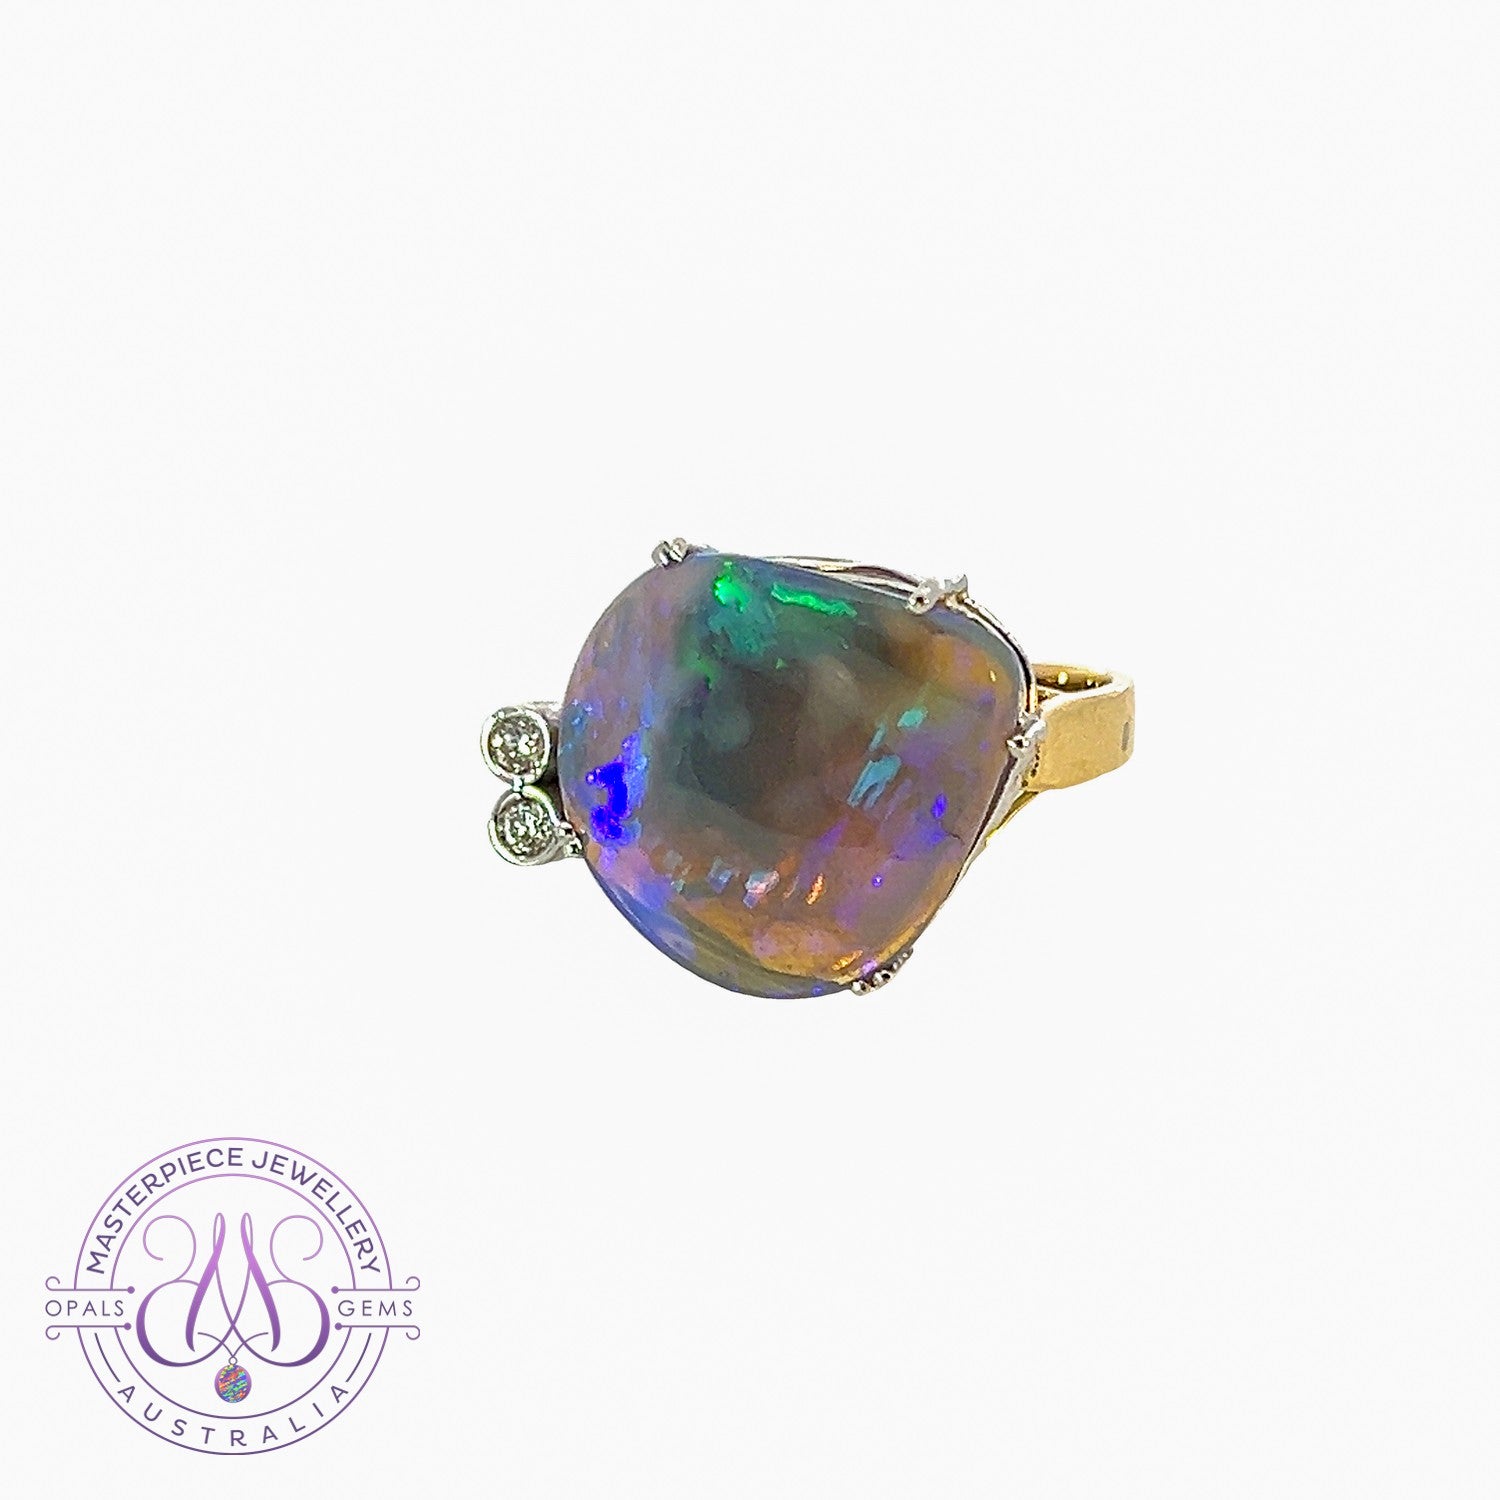 14kt White and Yellow Gold Black Opal 8.89ct and Diamond ring 0.08ct - Masterpiece Jewellery Opal & Gems Sydney Australia | Online Shop